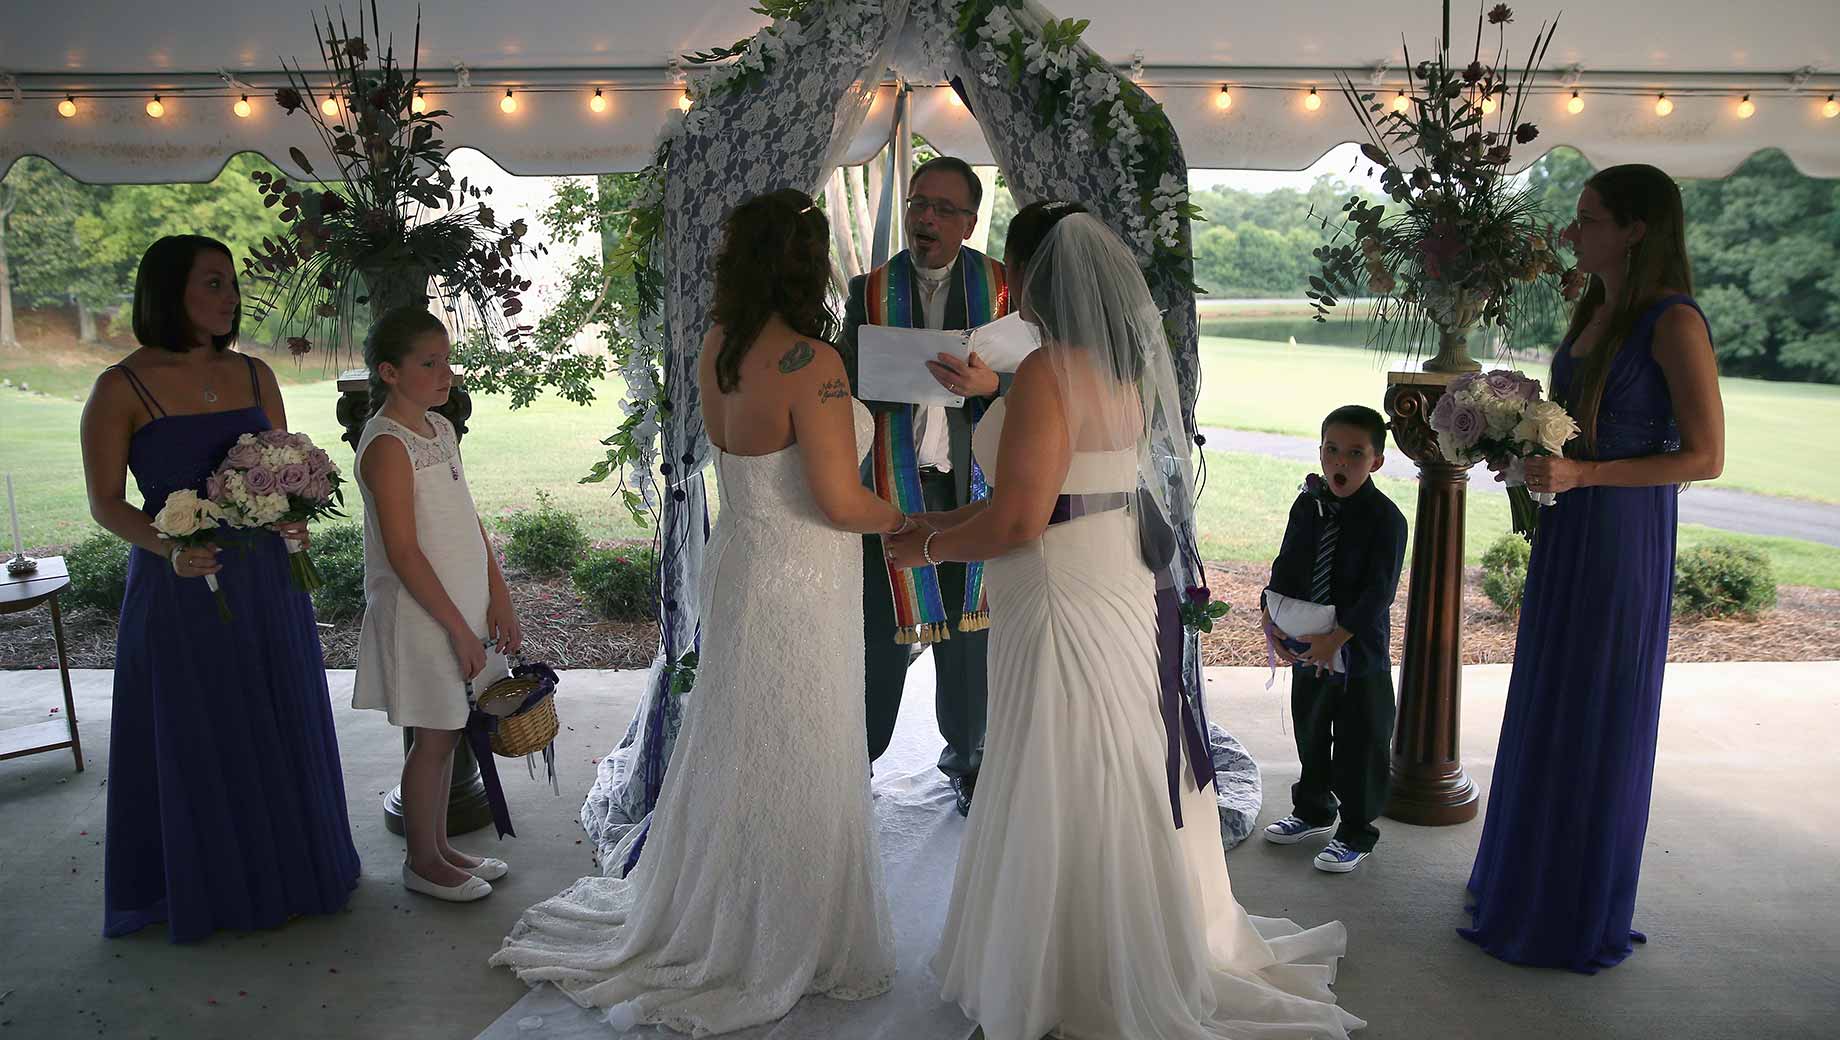 LGBT Americans Married to Same-Sex Spouse Steady at